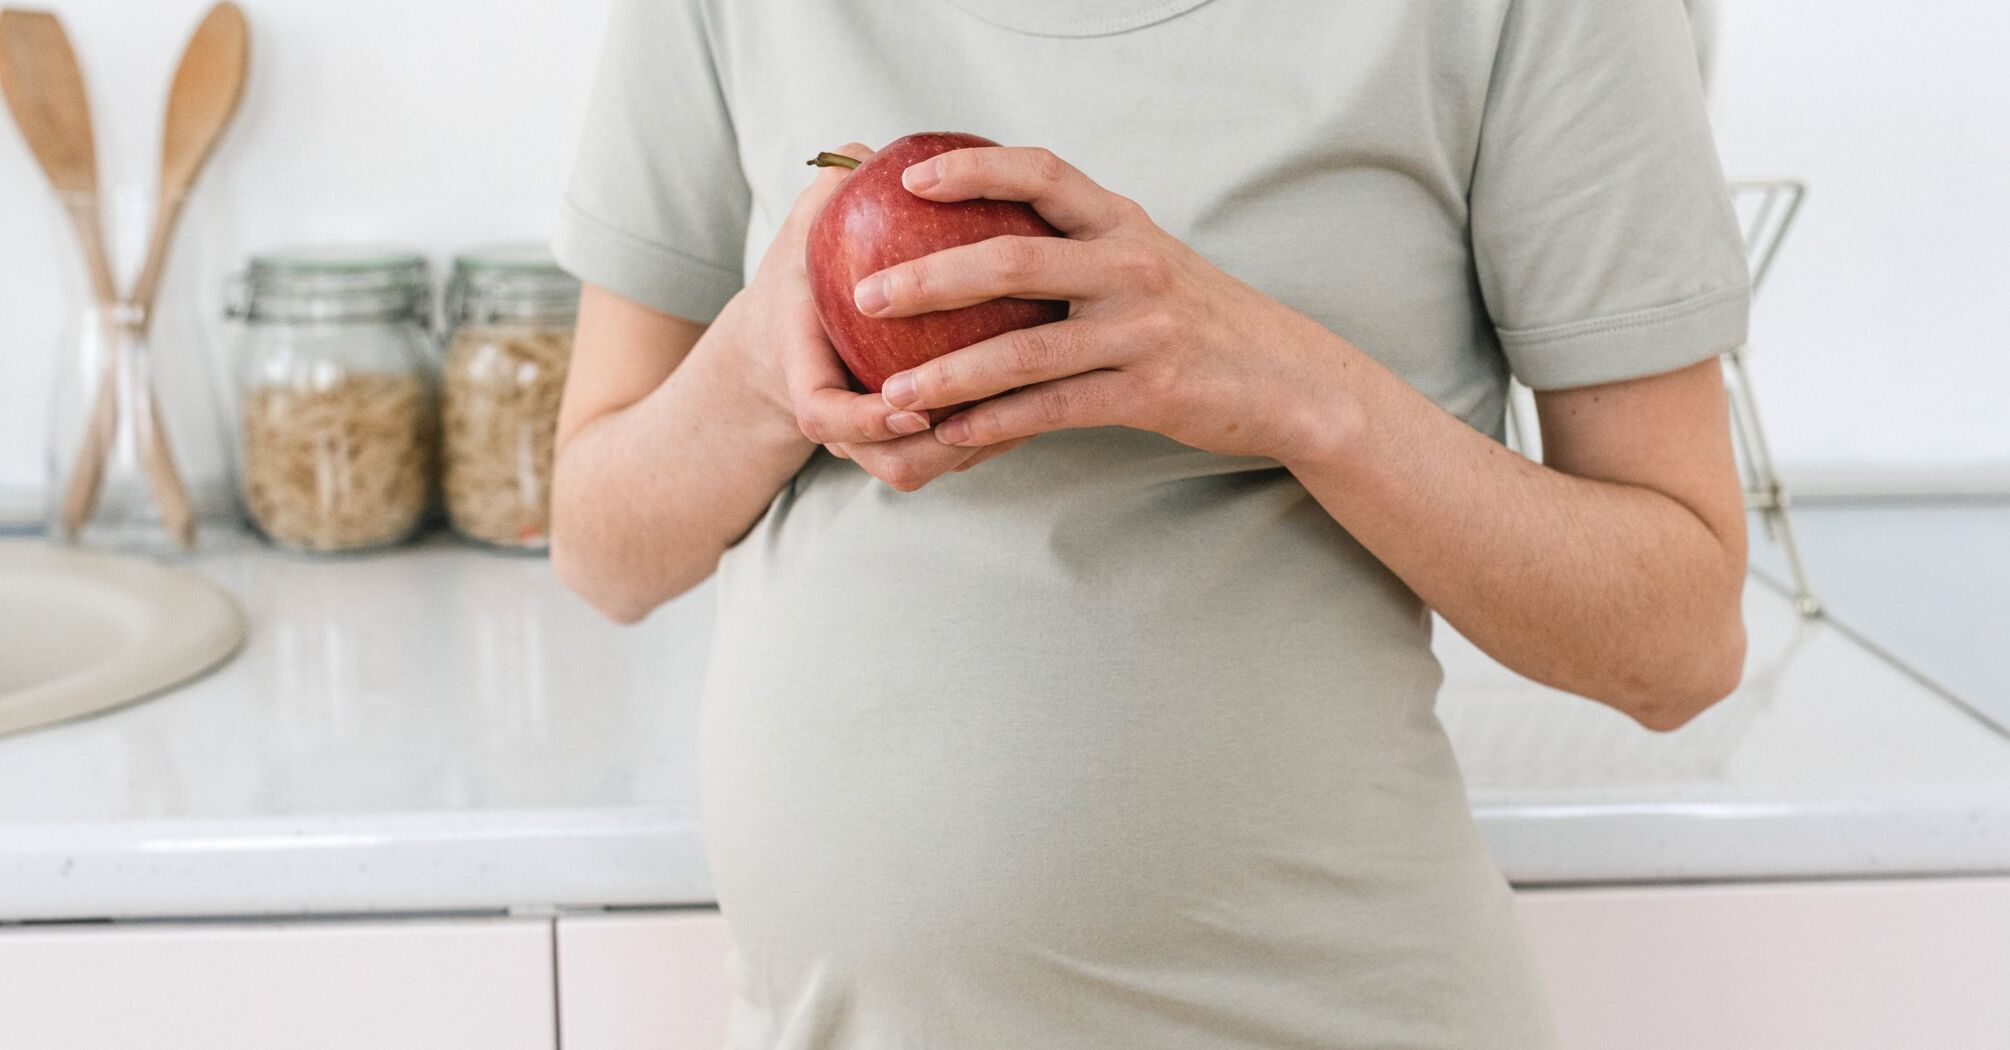 Can pregnant women eat red food?